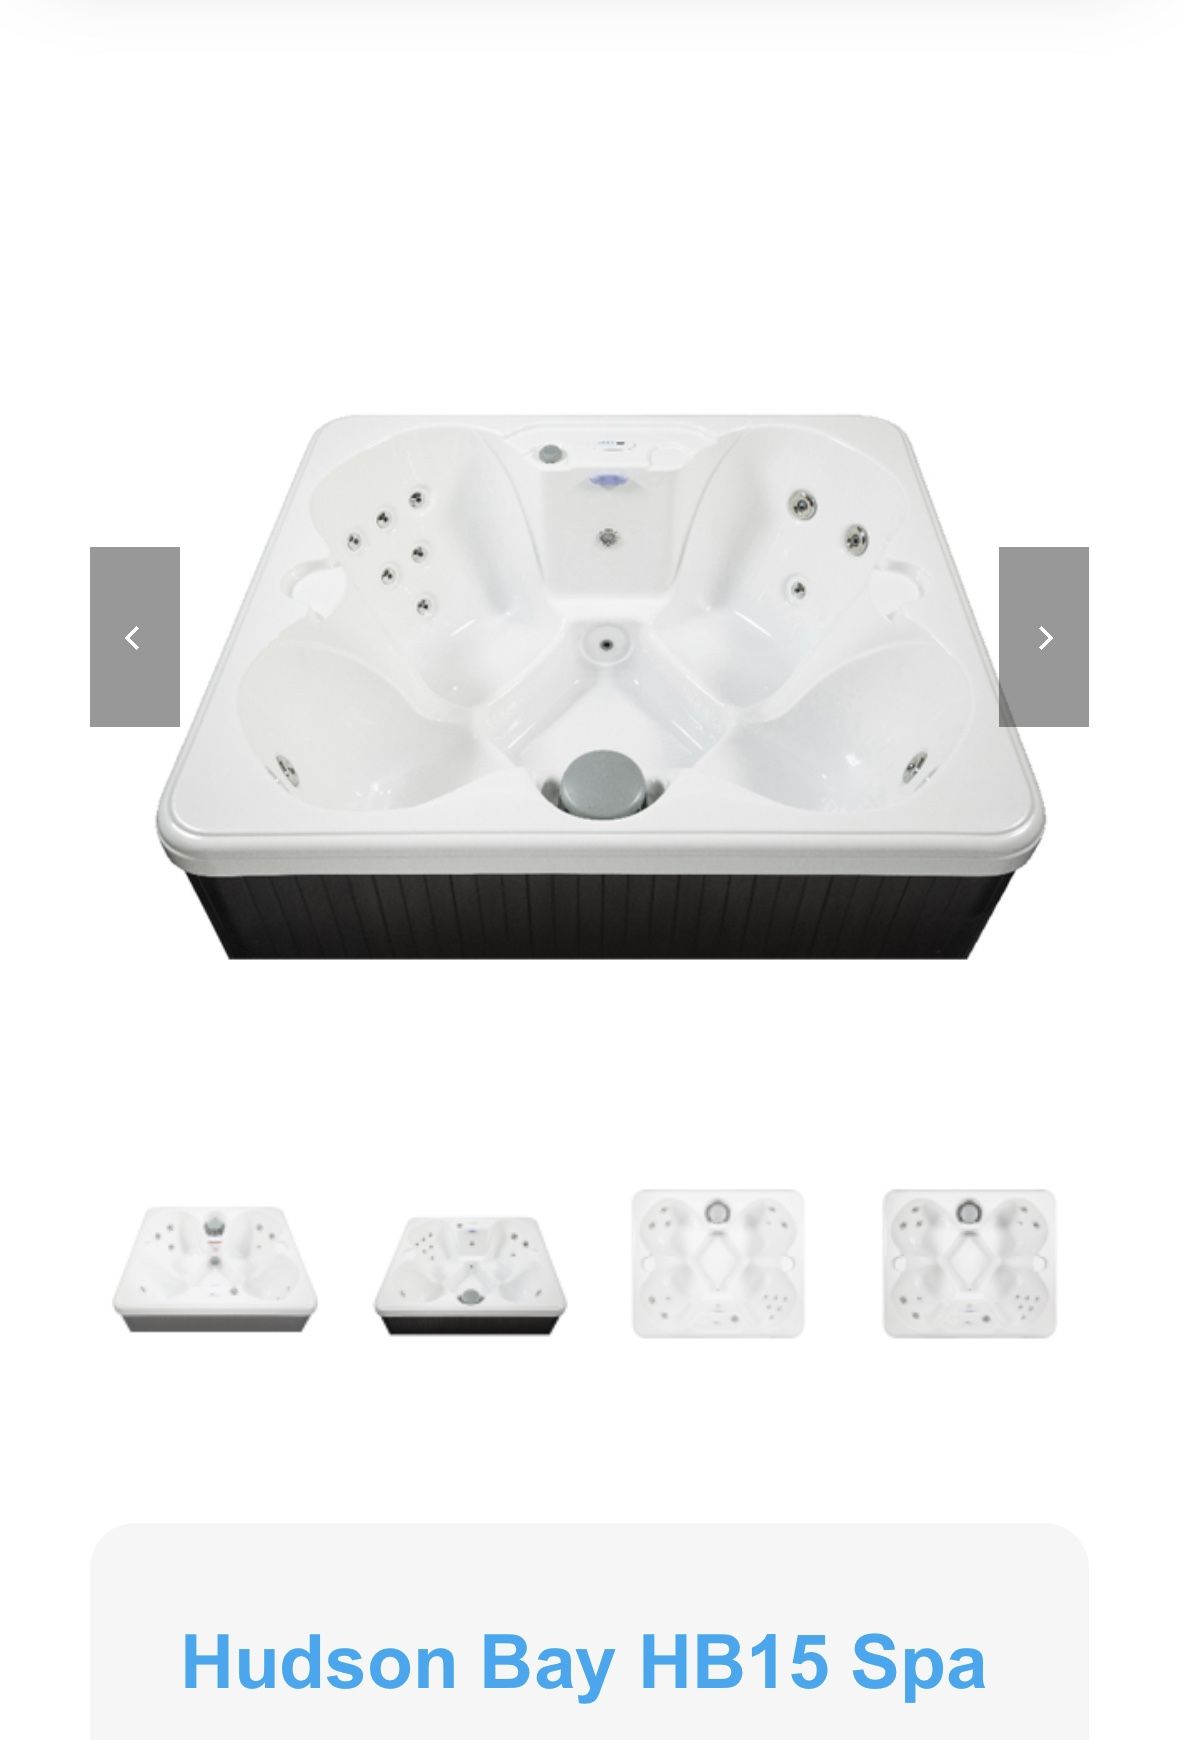 Brand New 4 Person (15 Jets) Hot tub